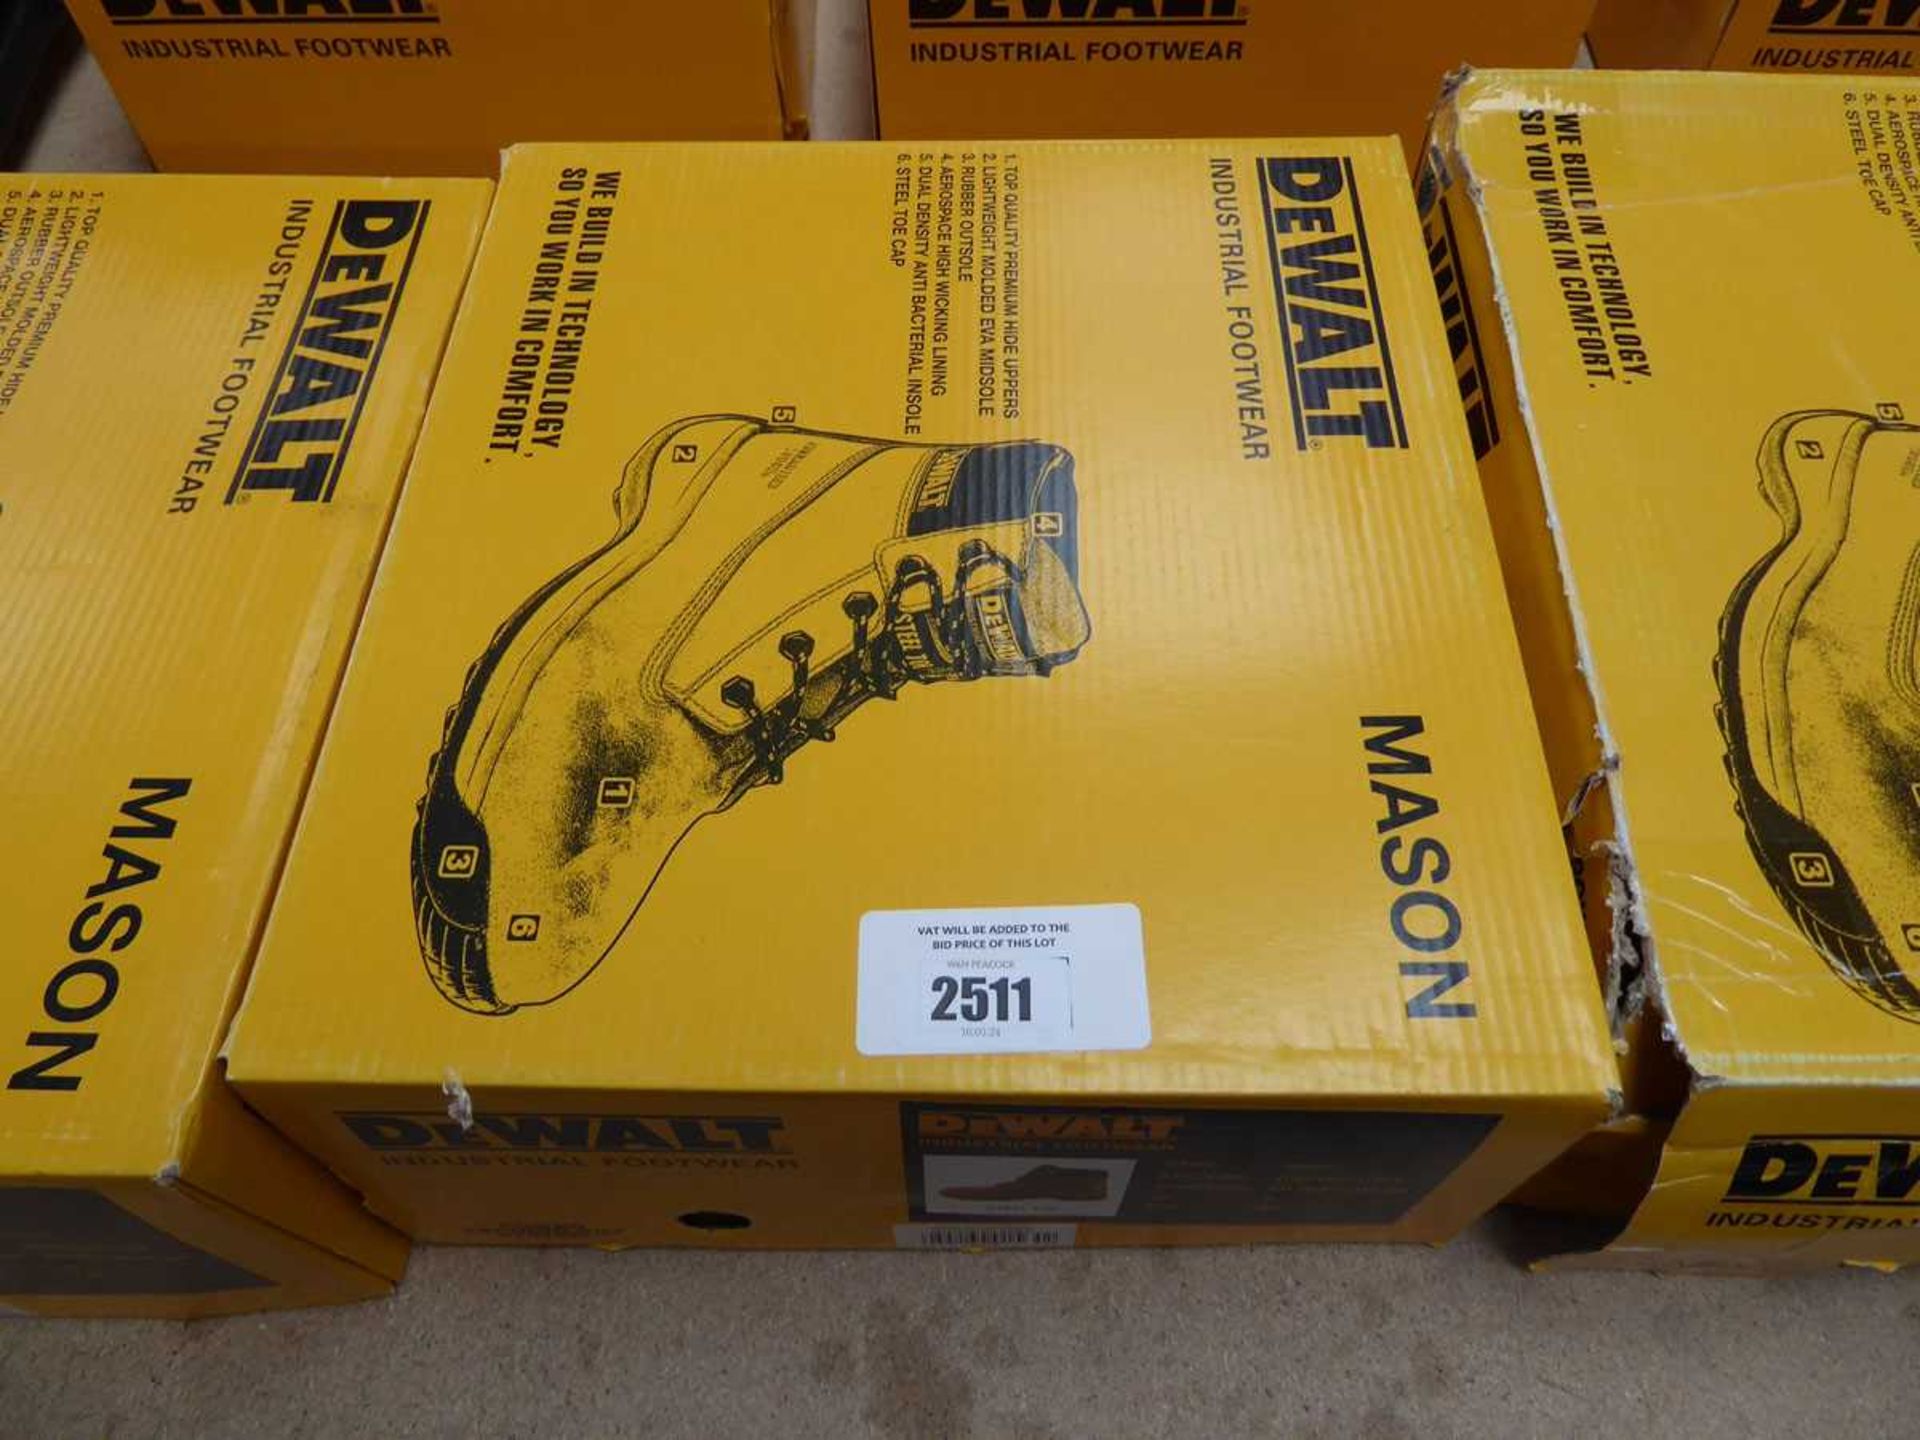 +VAT Boxed pair of DeWalt Mason steel toe safety boots in tan (size 8)